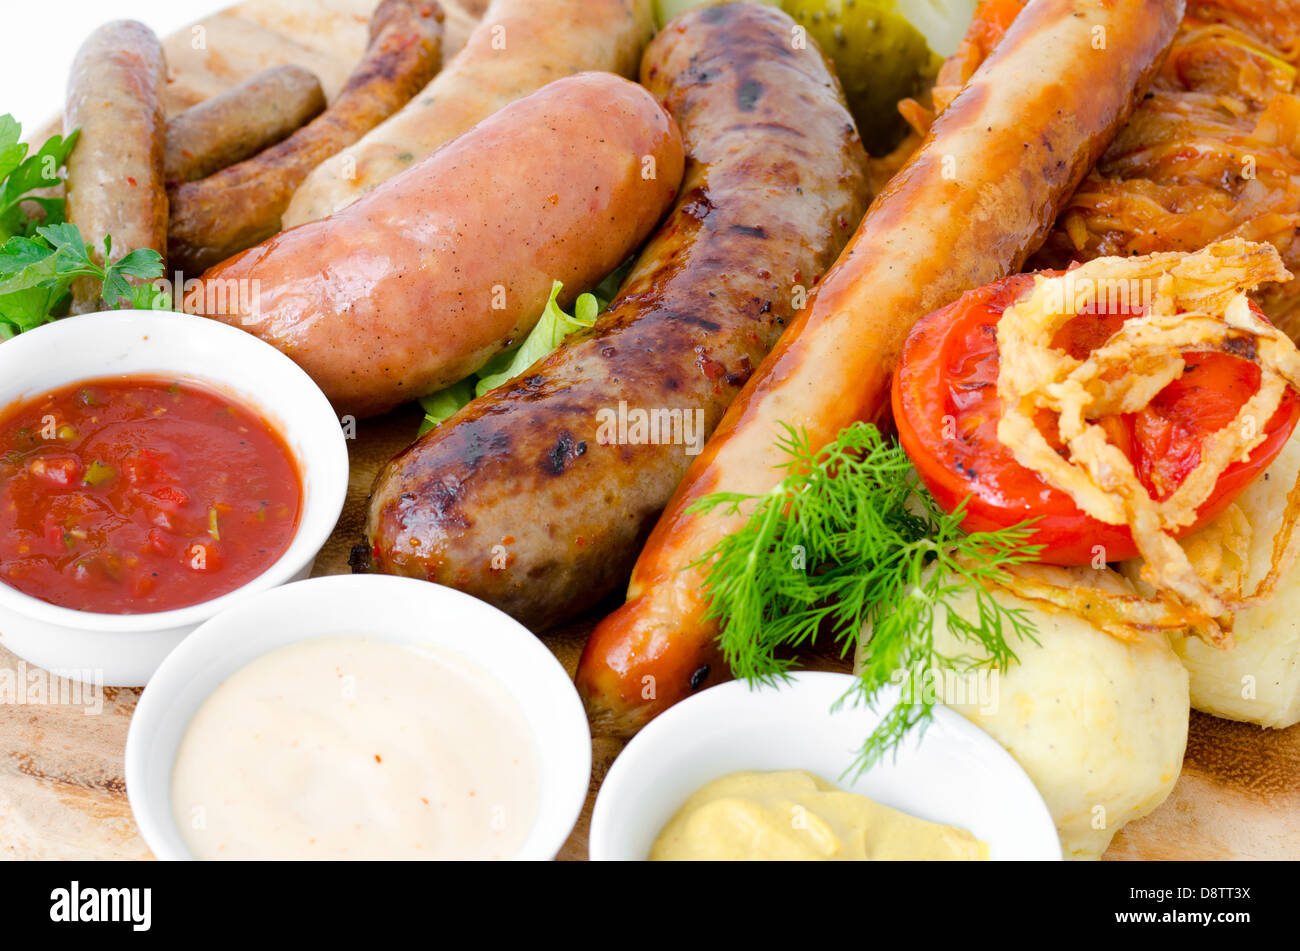 various sausages with sauces Stock Photo